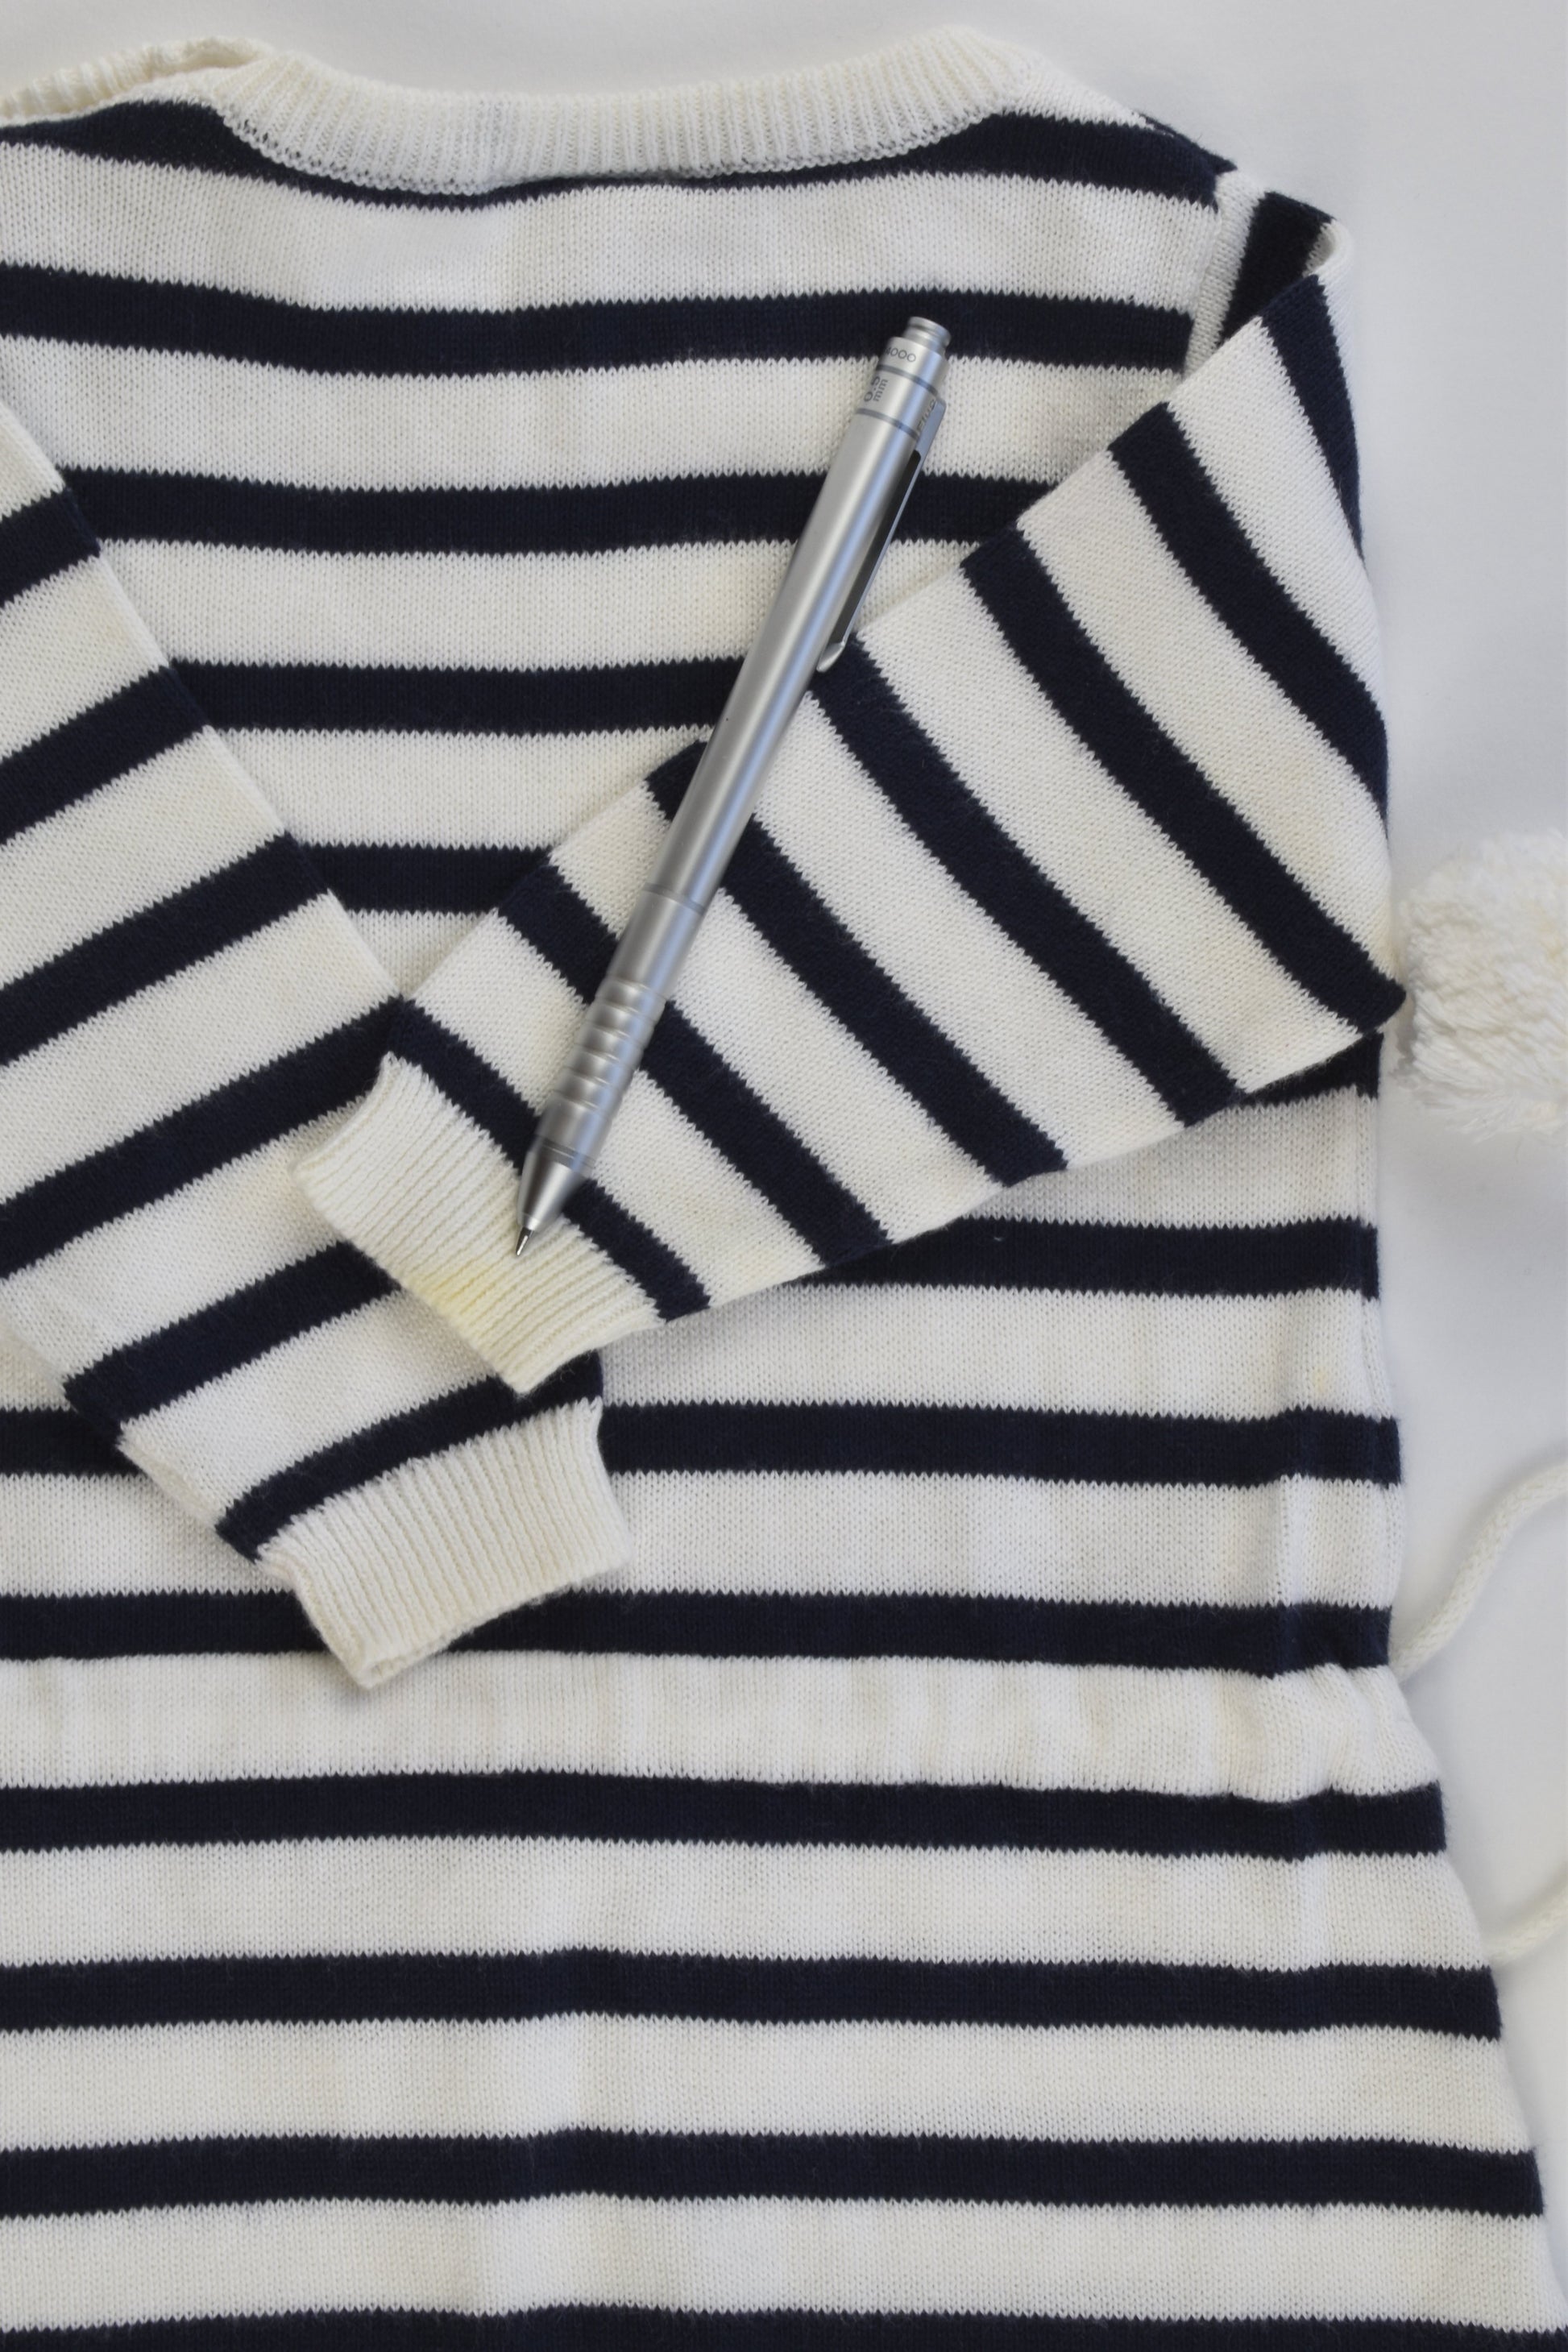 Seed Heritage Size 000 (0-3 months) Striped Knitted Dress with Pom Pom Belt